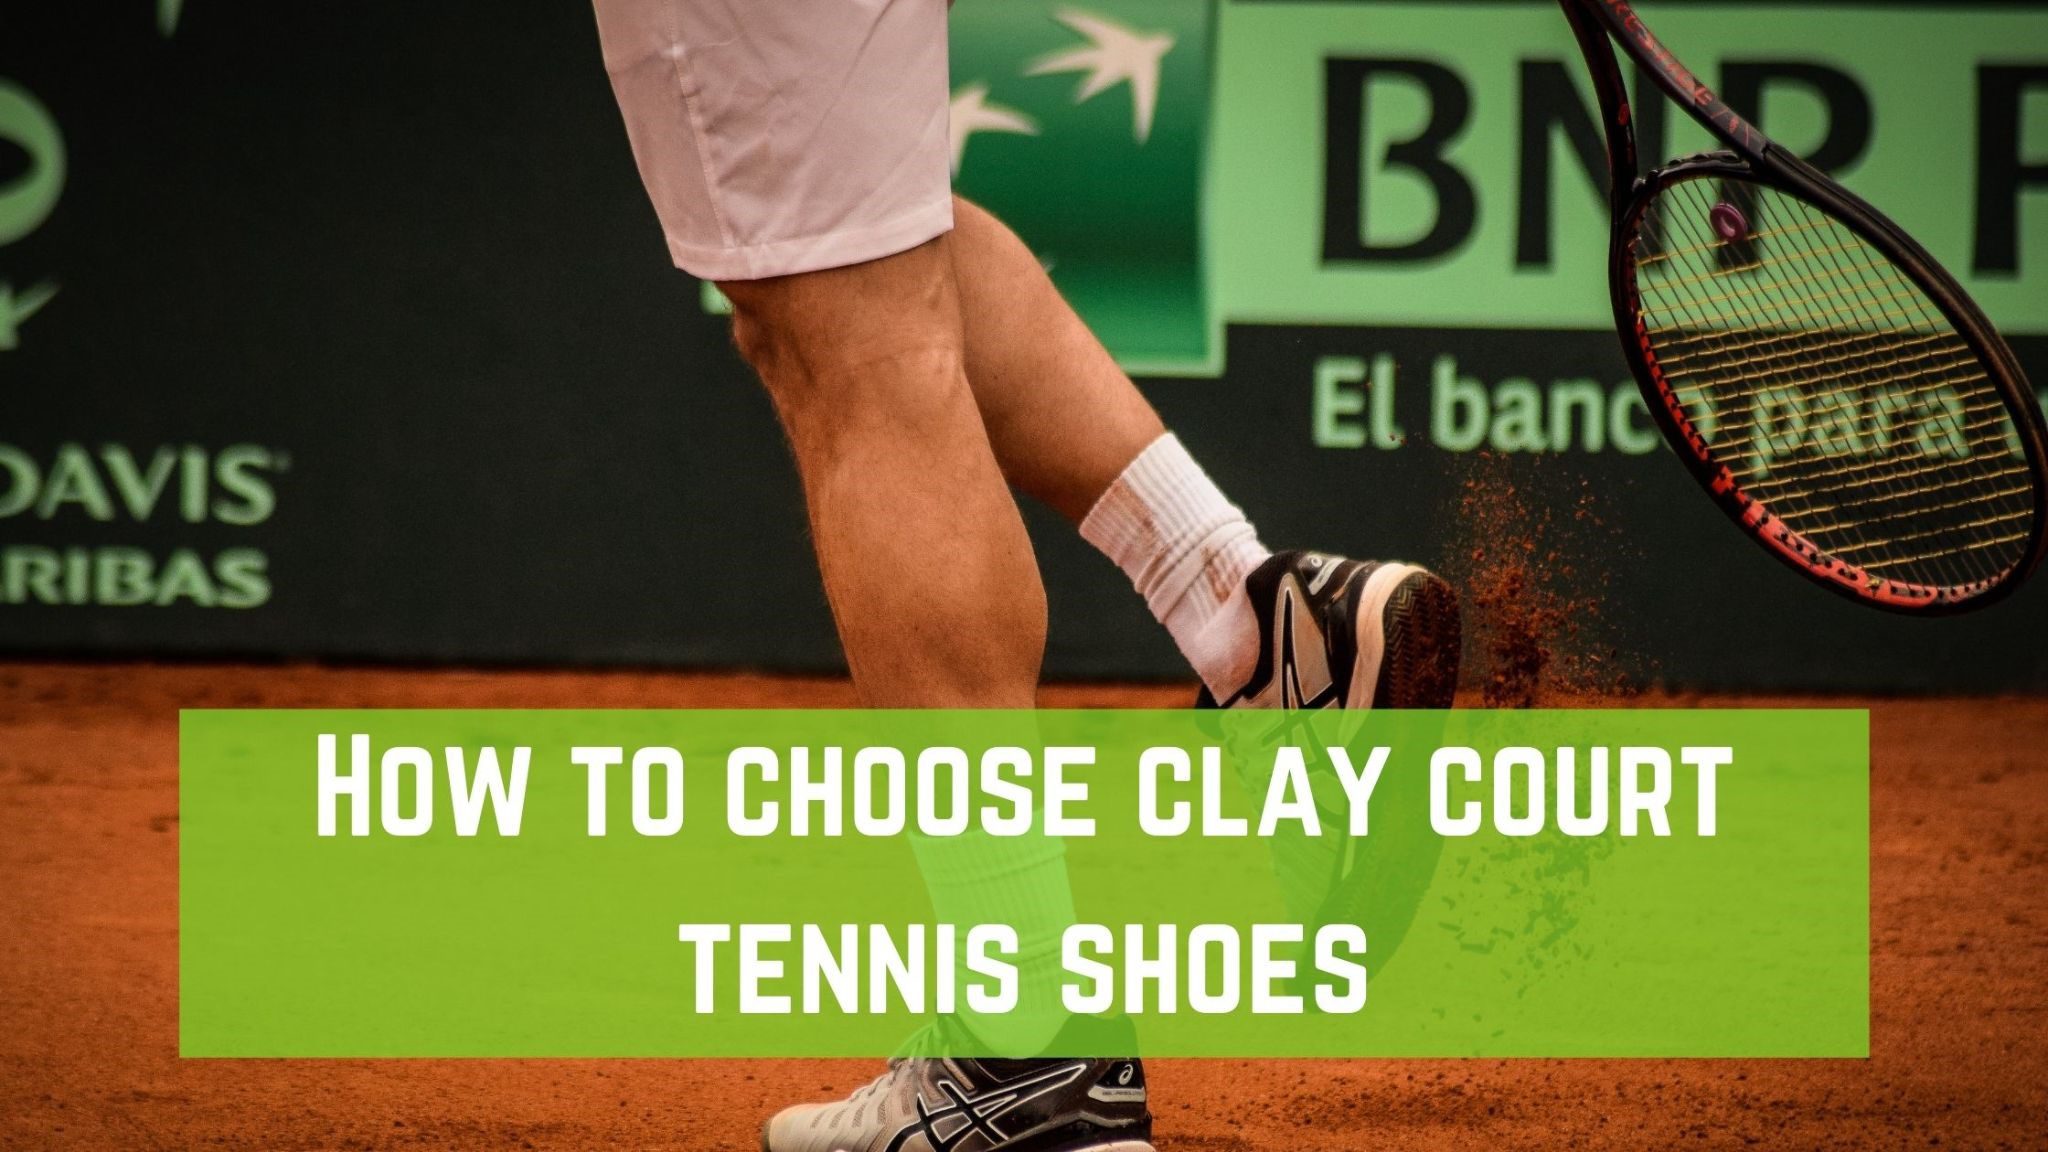 How to Choose Clay Court Tennis Shoes?